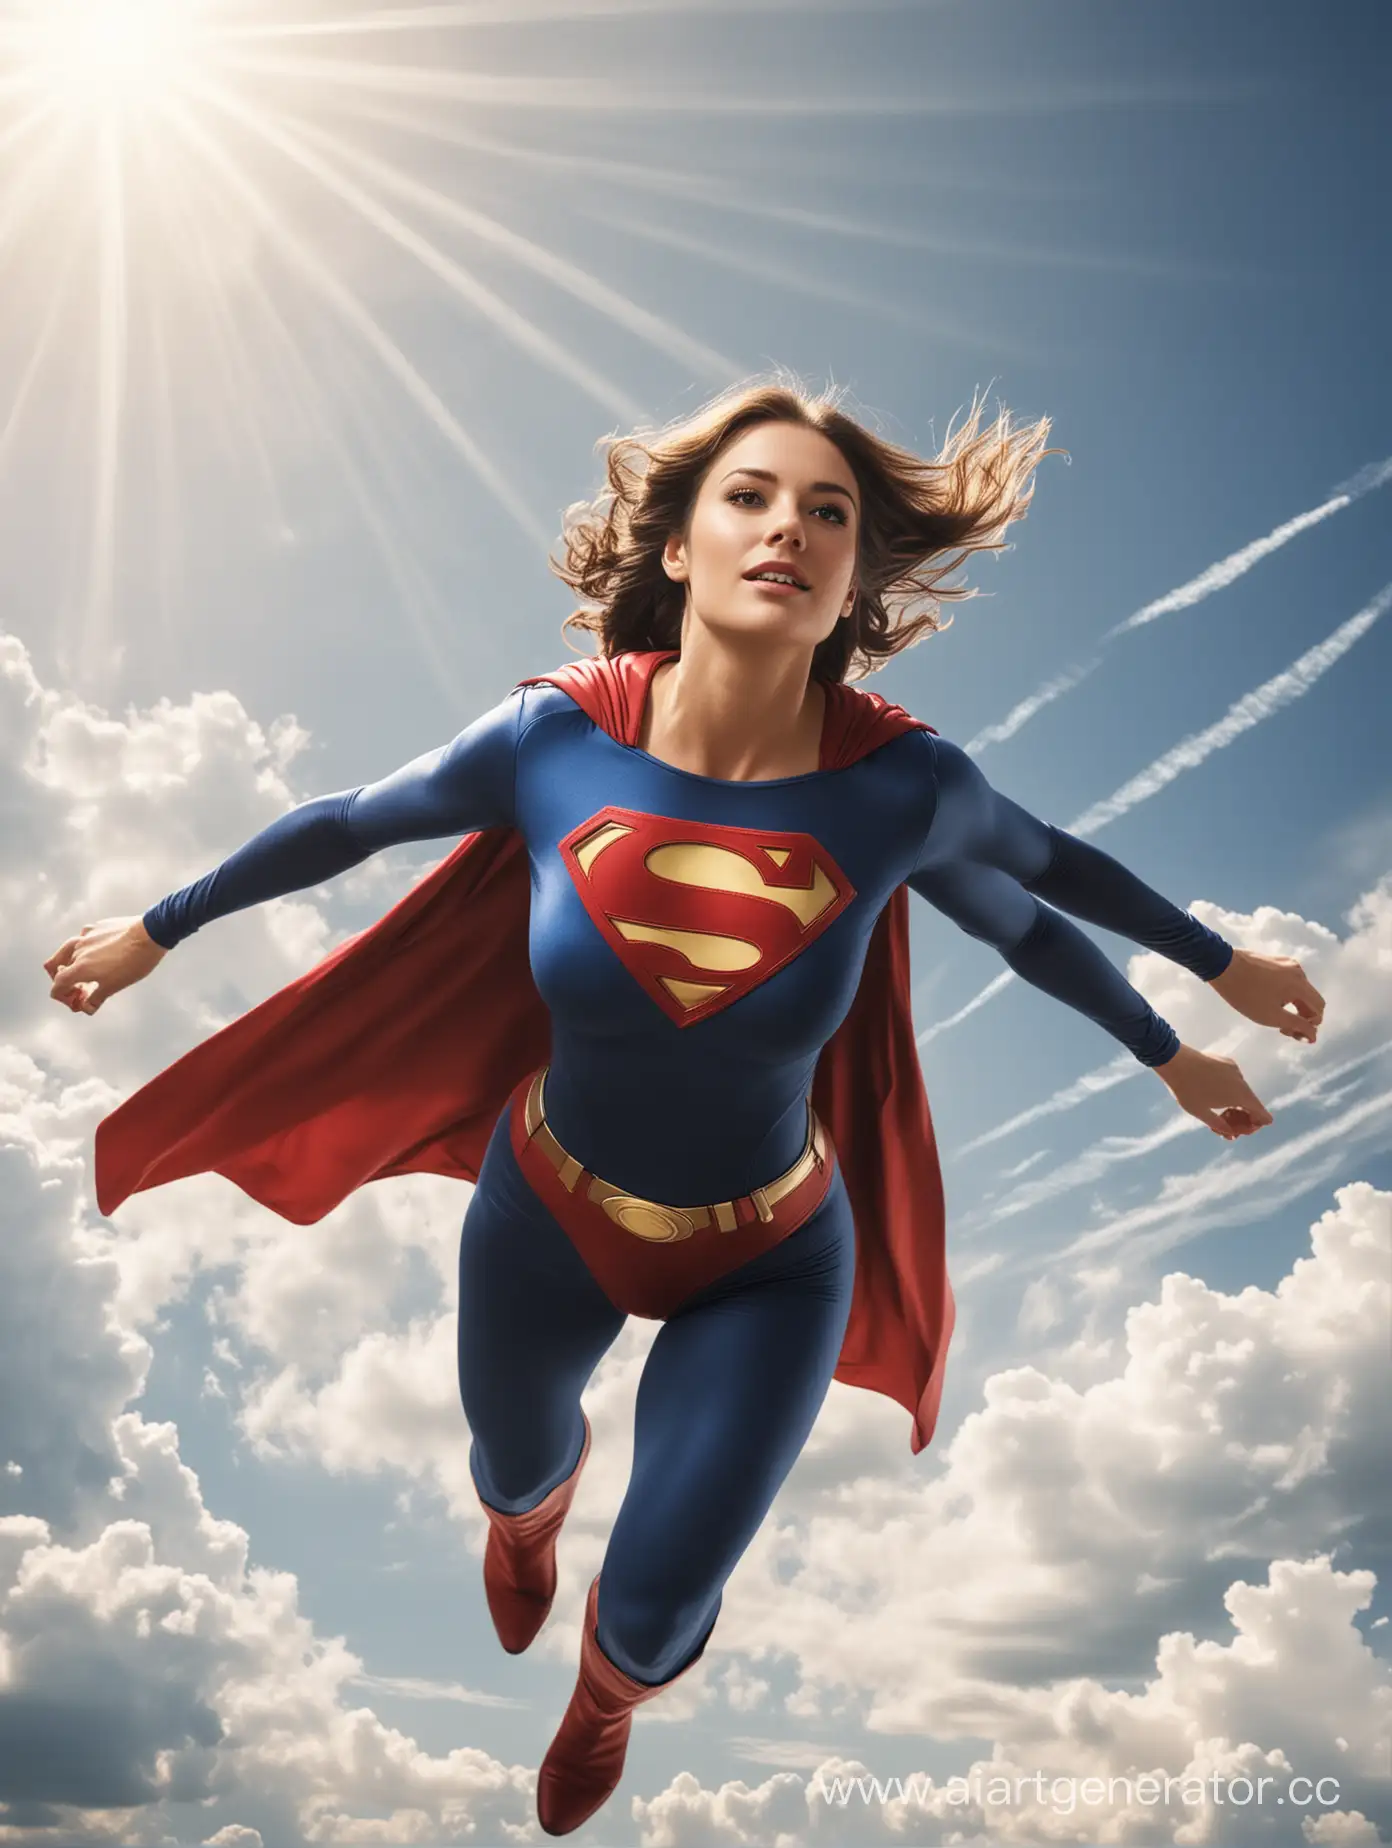 A beautiful woman with brown hair, age 30, She is flying through the sky like Superman, she is wearing the classic Superman costume